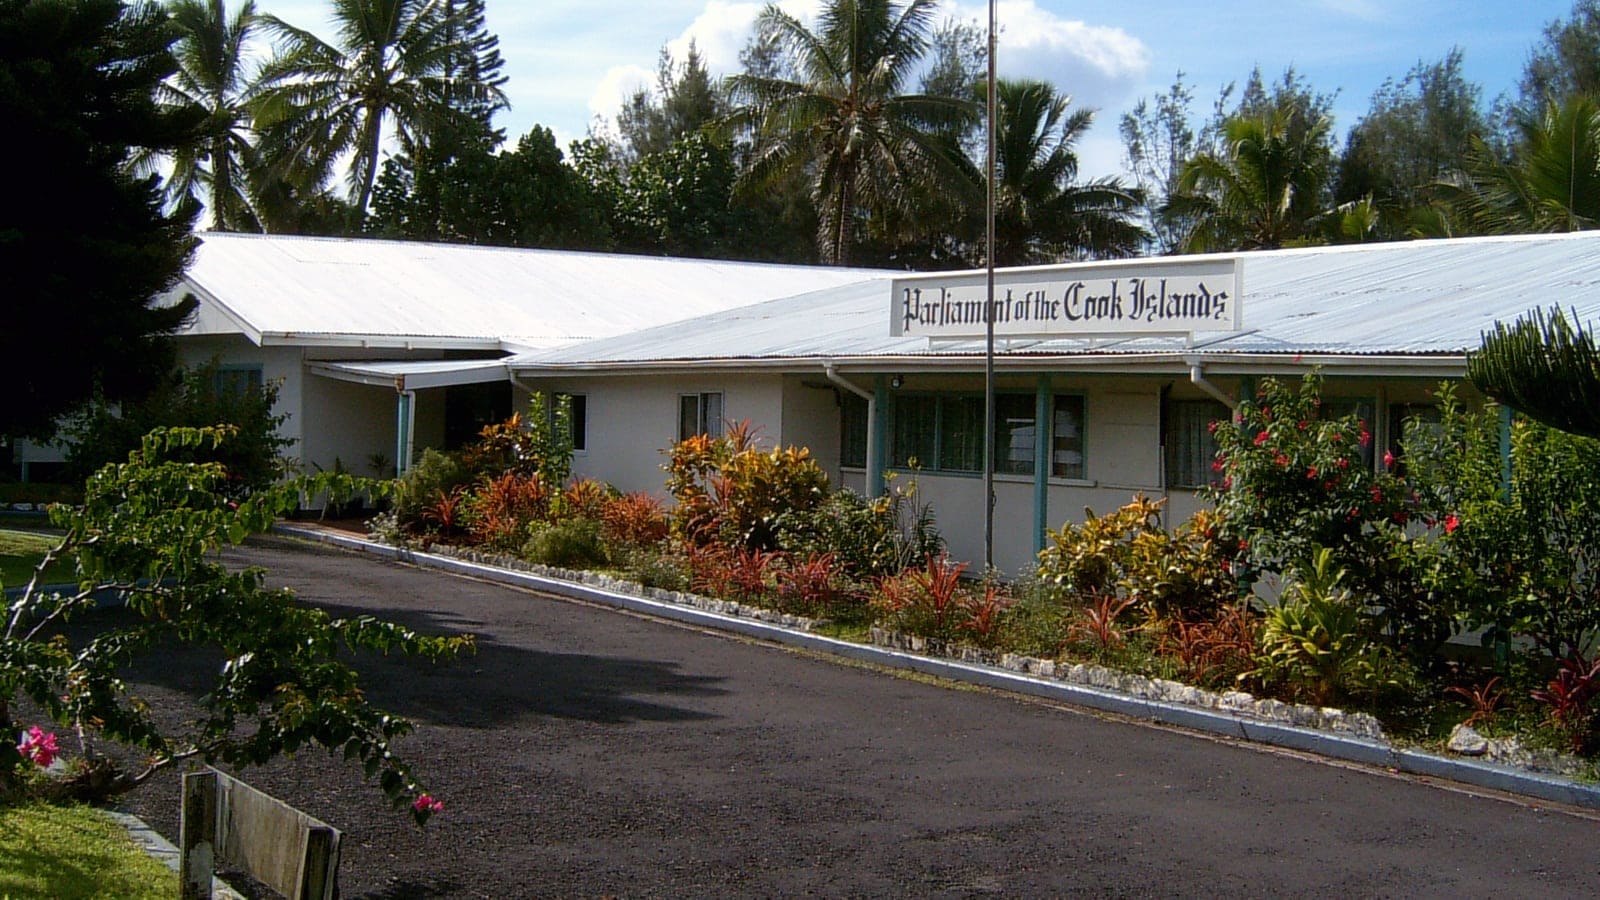 Adventists elected into Cook Islands Parliament